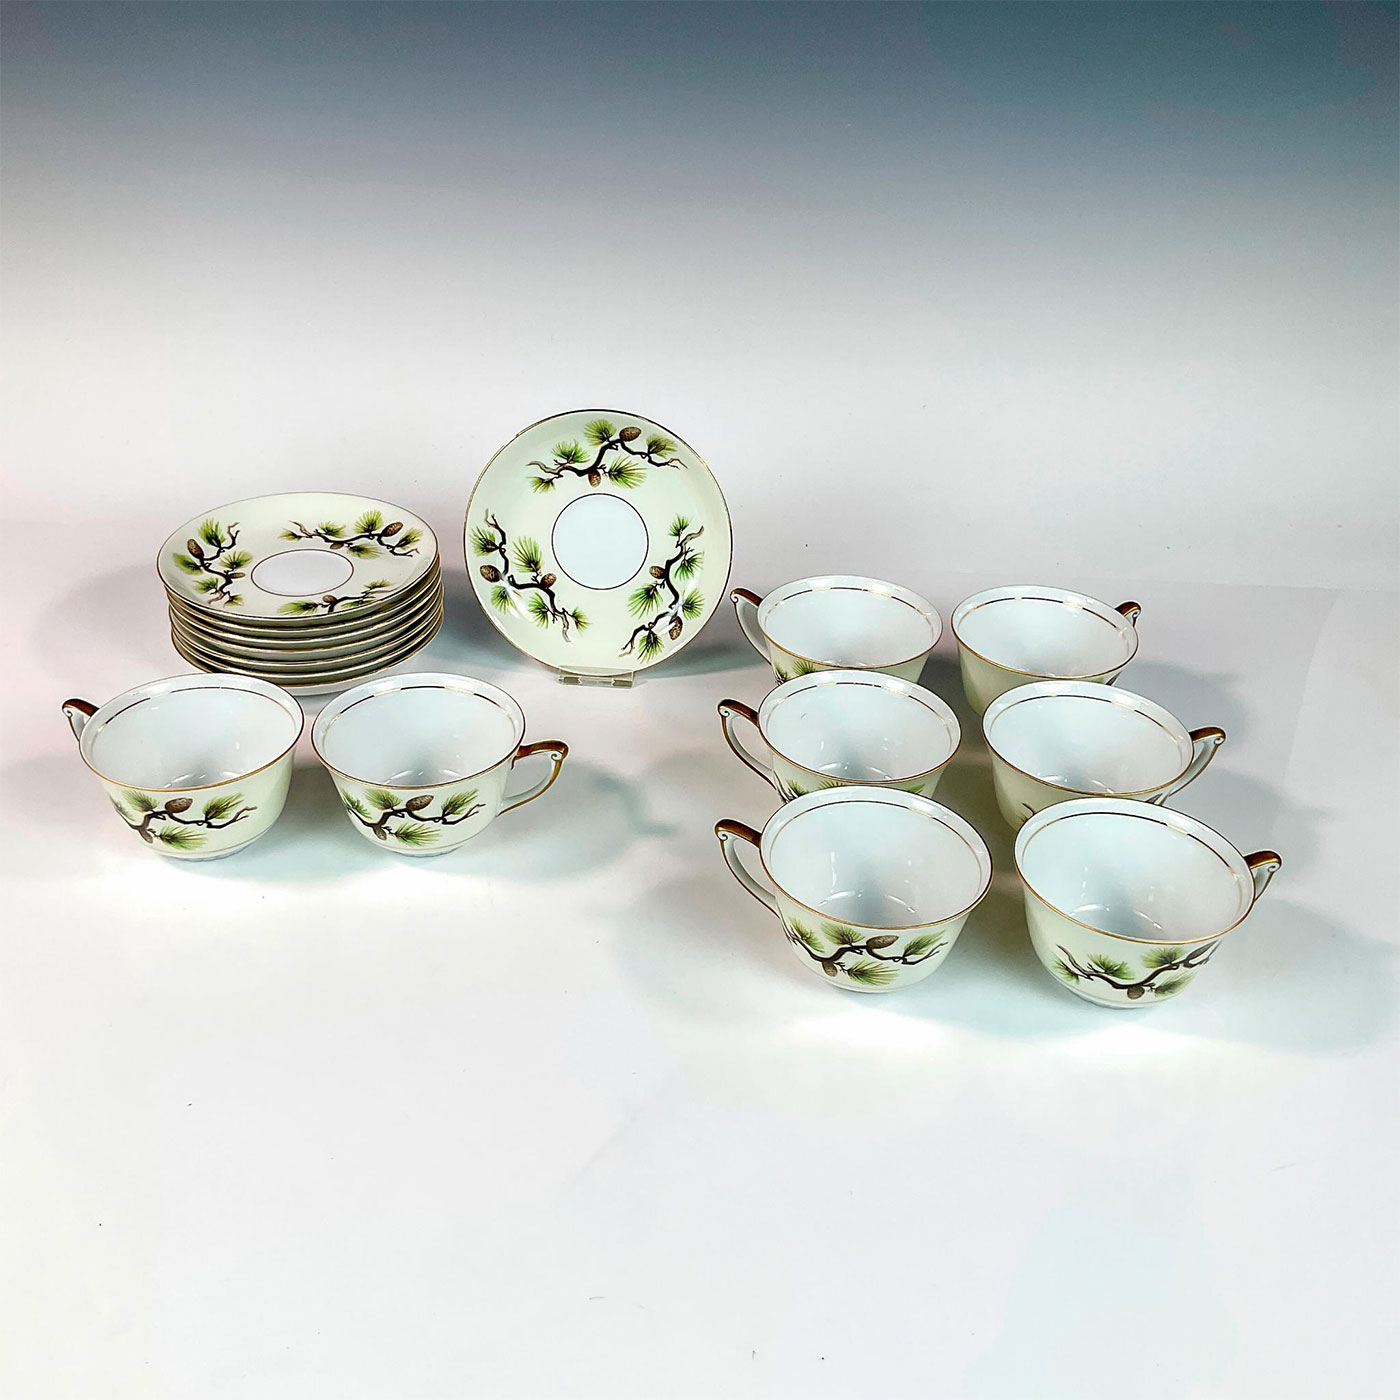 16pc Vintage Narumi Fine China Cups and Saucers, Shasta Pine - Image 2 of 4